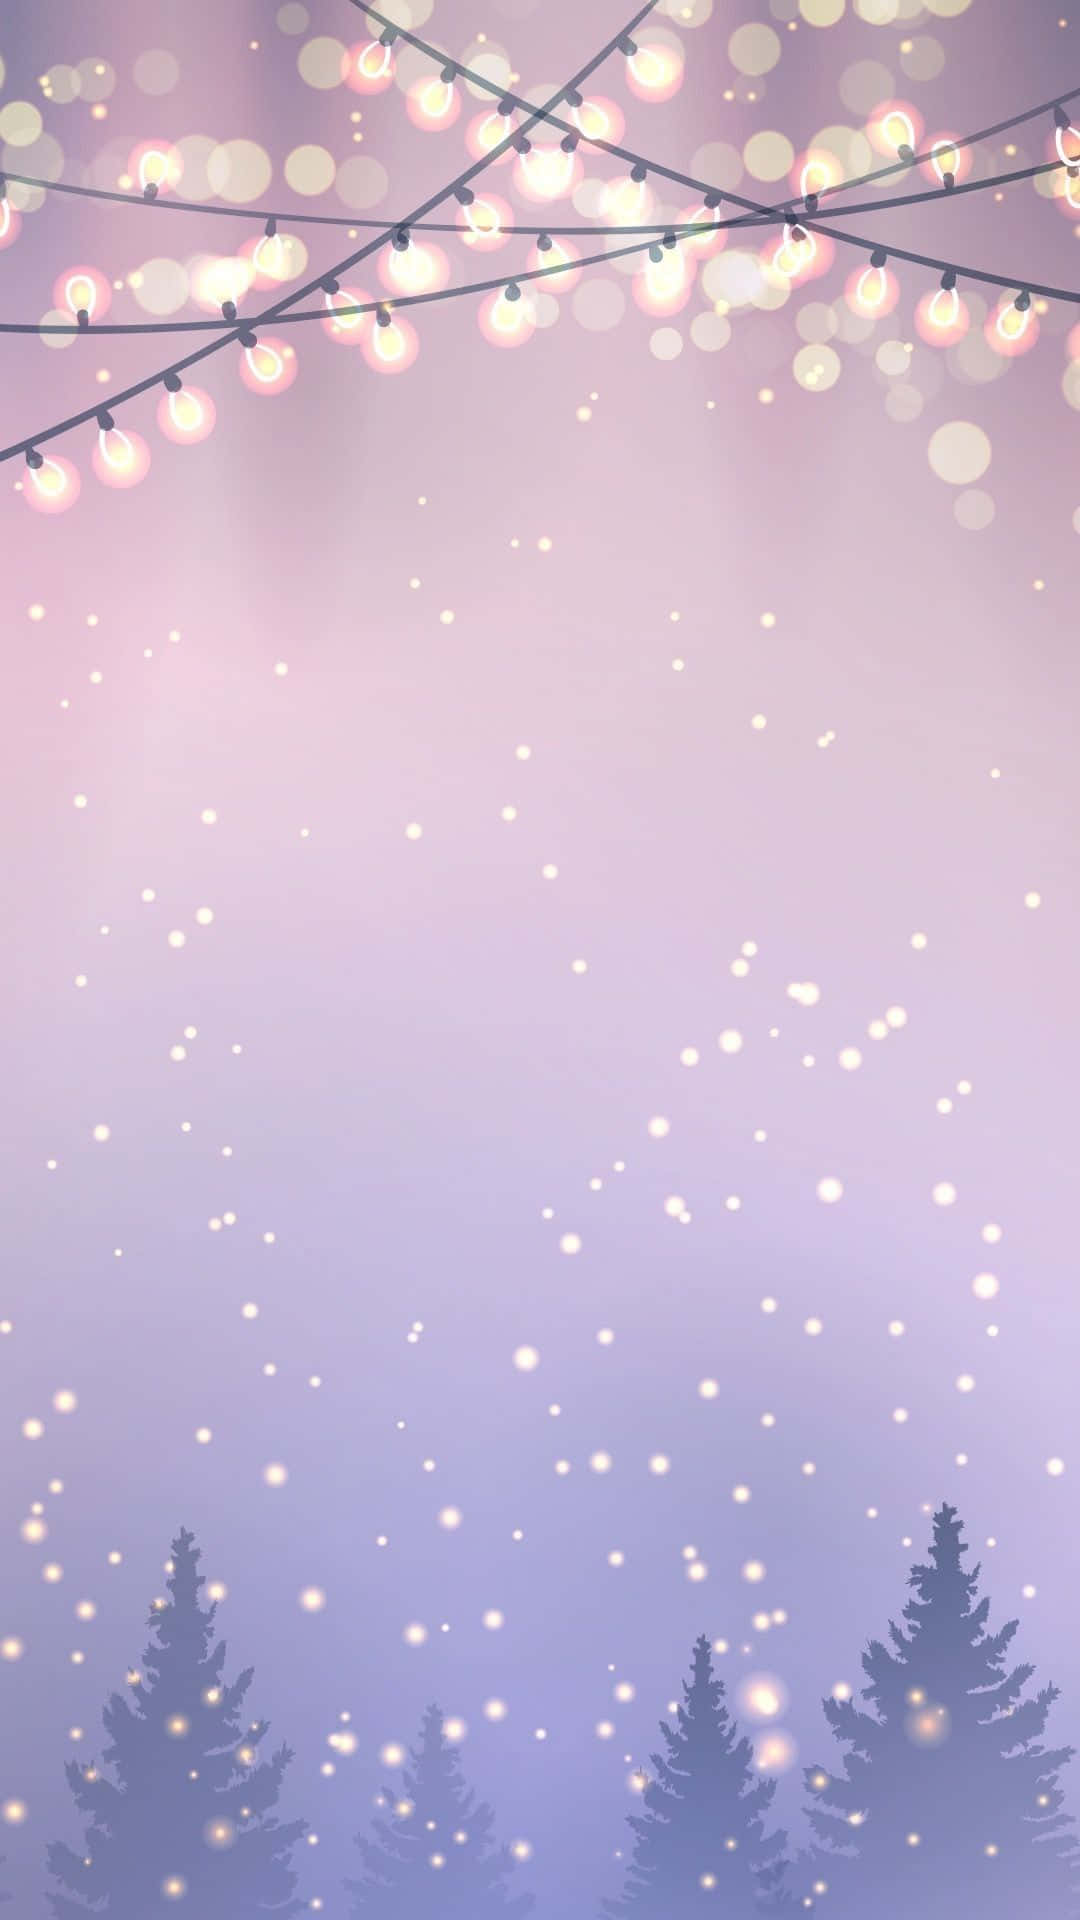 Create festive holiday vibes with a cute Christmas phone! Wallpaper